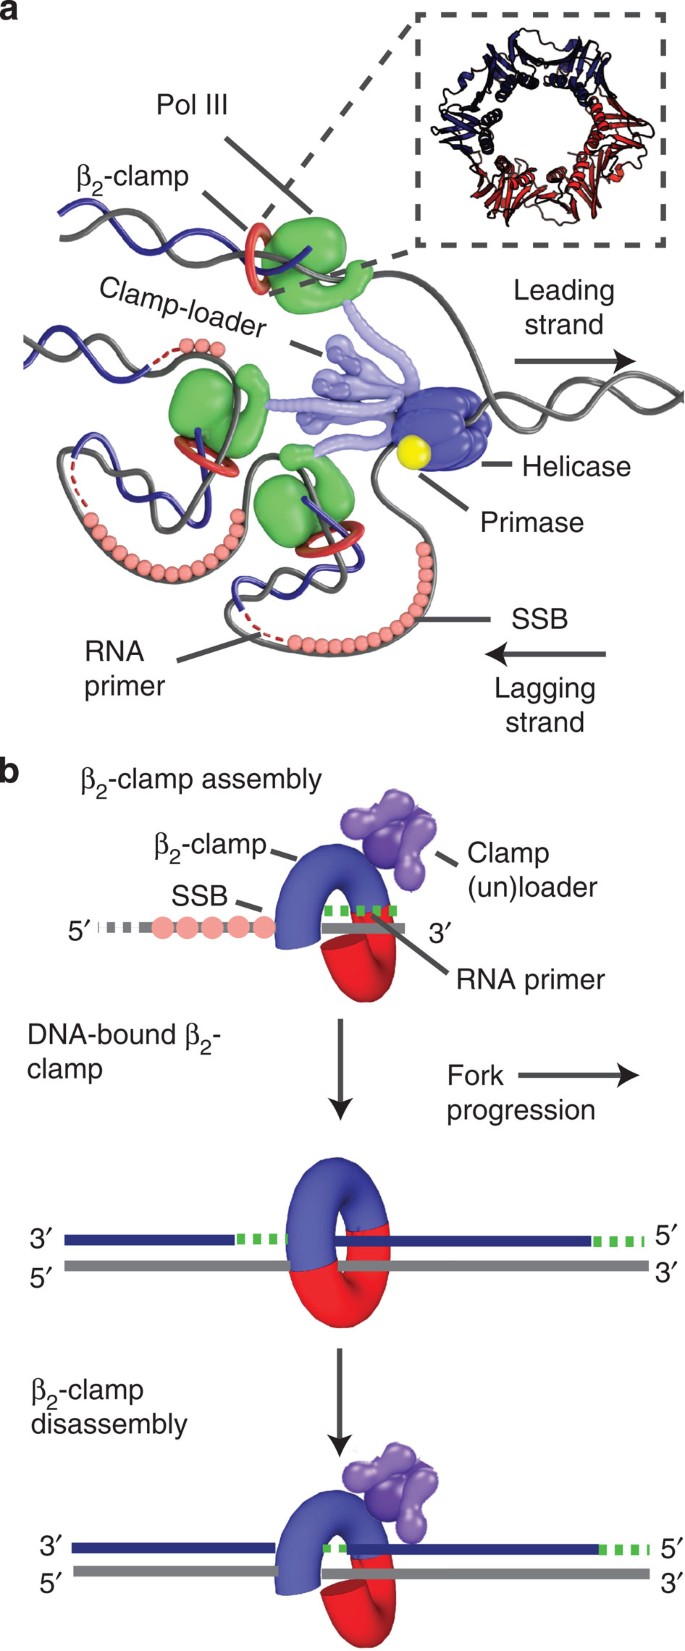 Slow Unloading Leads To Dna Bound B 2 Sliding Clamp Accumulation In Live Escherichia Coli Cells Nature Communications